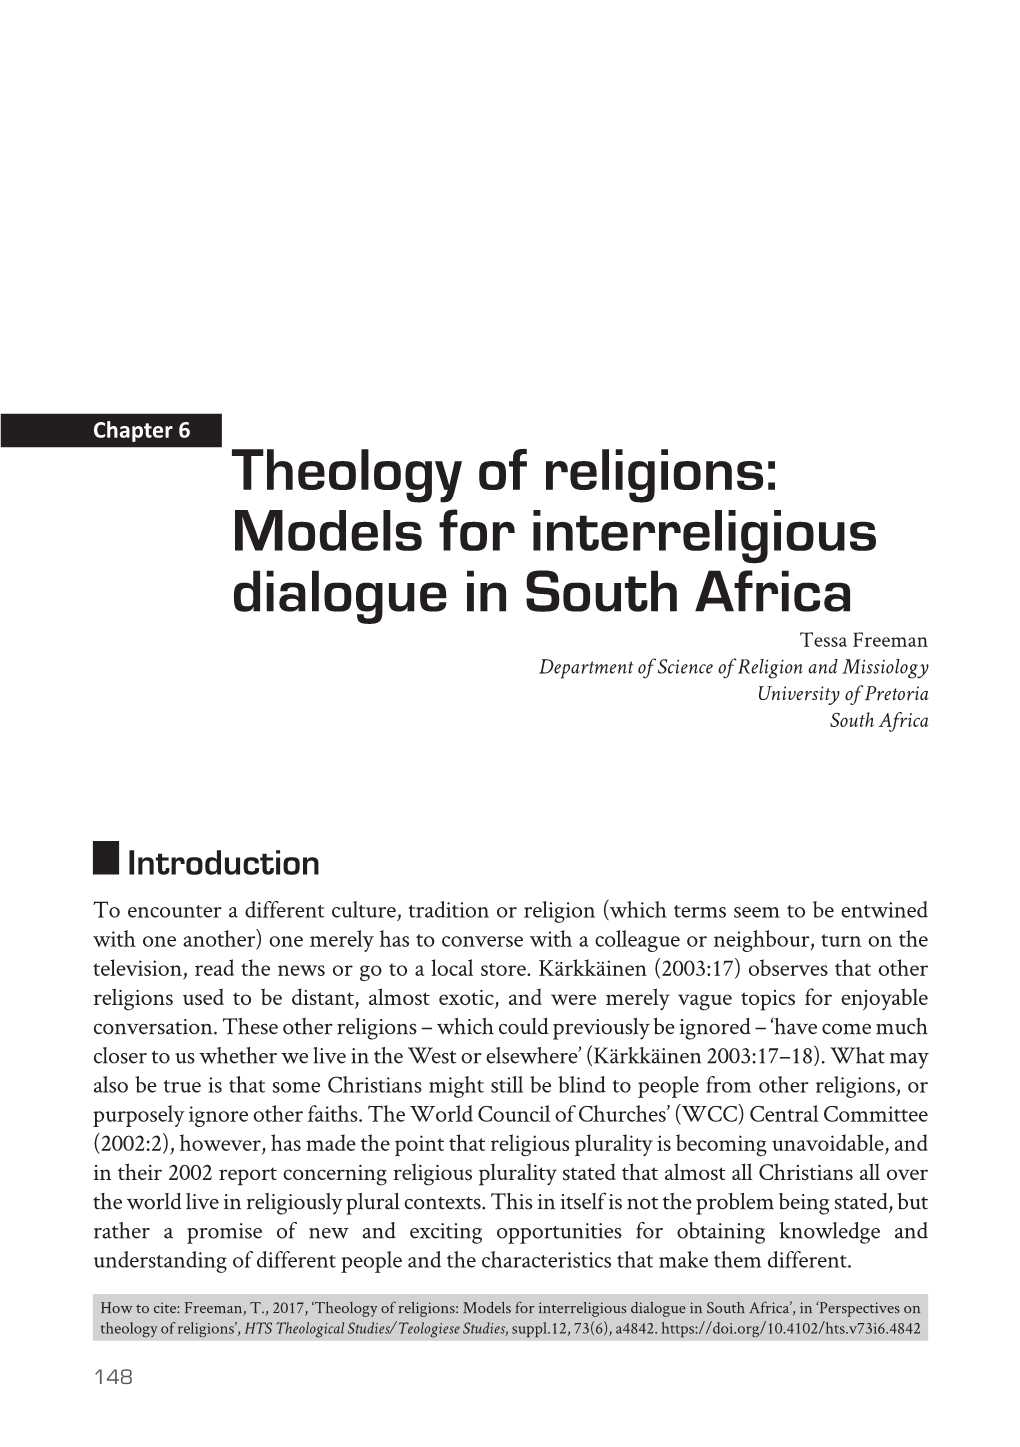 Theology of Religions: Models for Interreligious Dialogue in South Africa